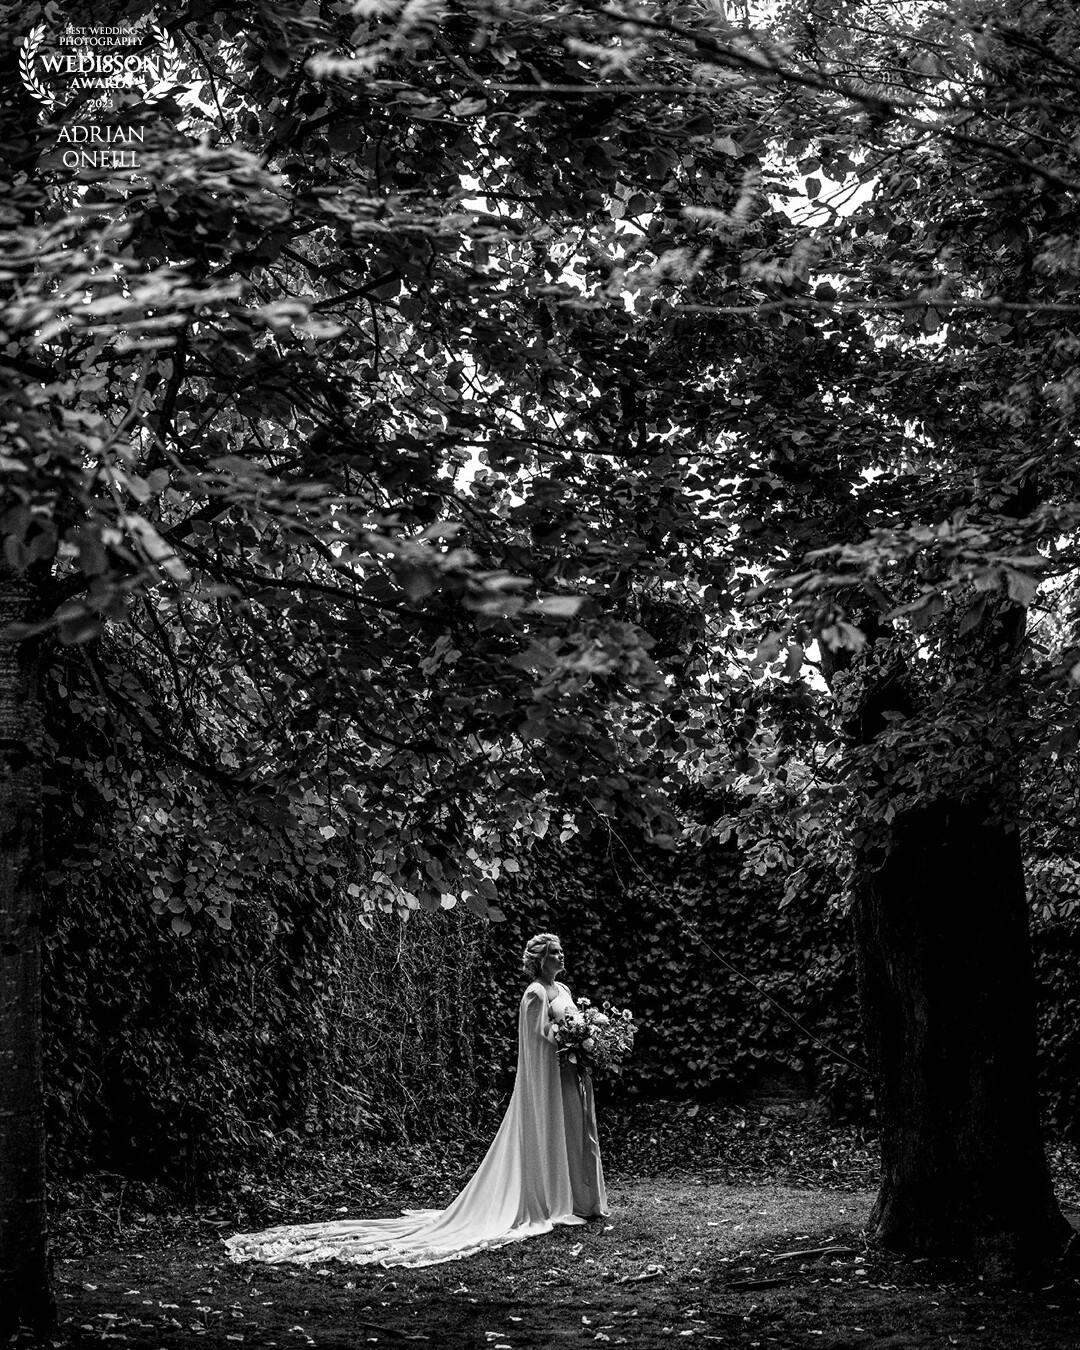 To look at this area of the hotel grounds you'd might not think anything of it....but by placing the bride on the light on the other side of the dark trees it gave a lovely dimension to the image